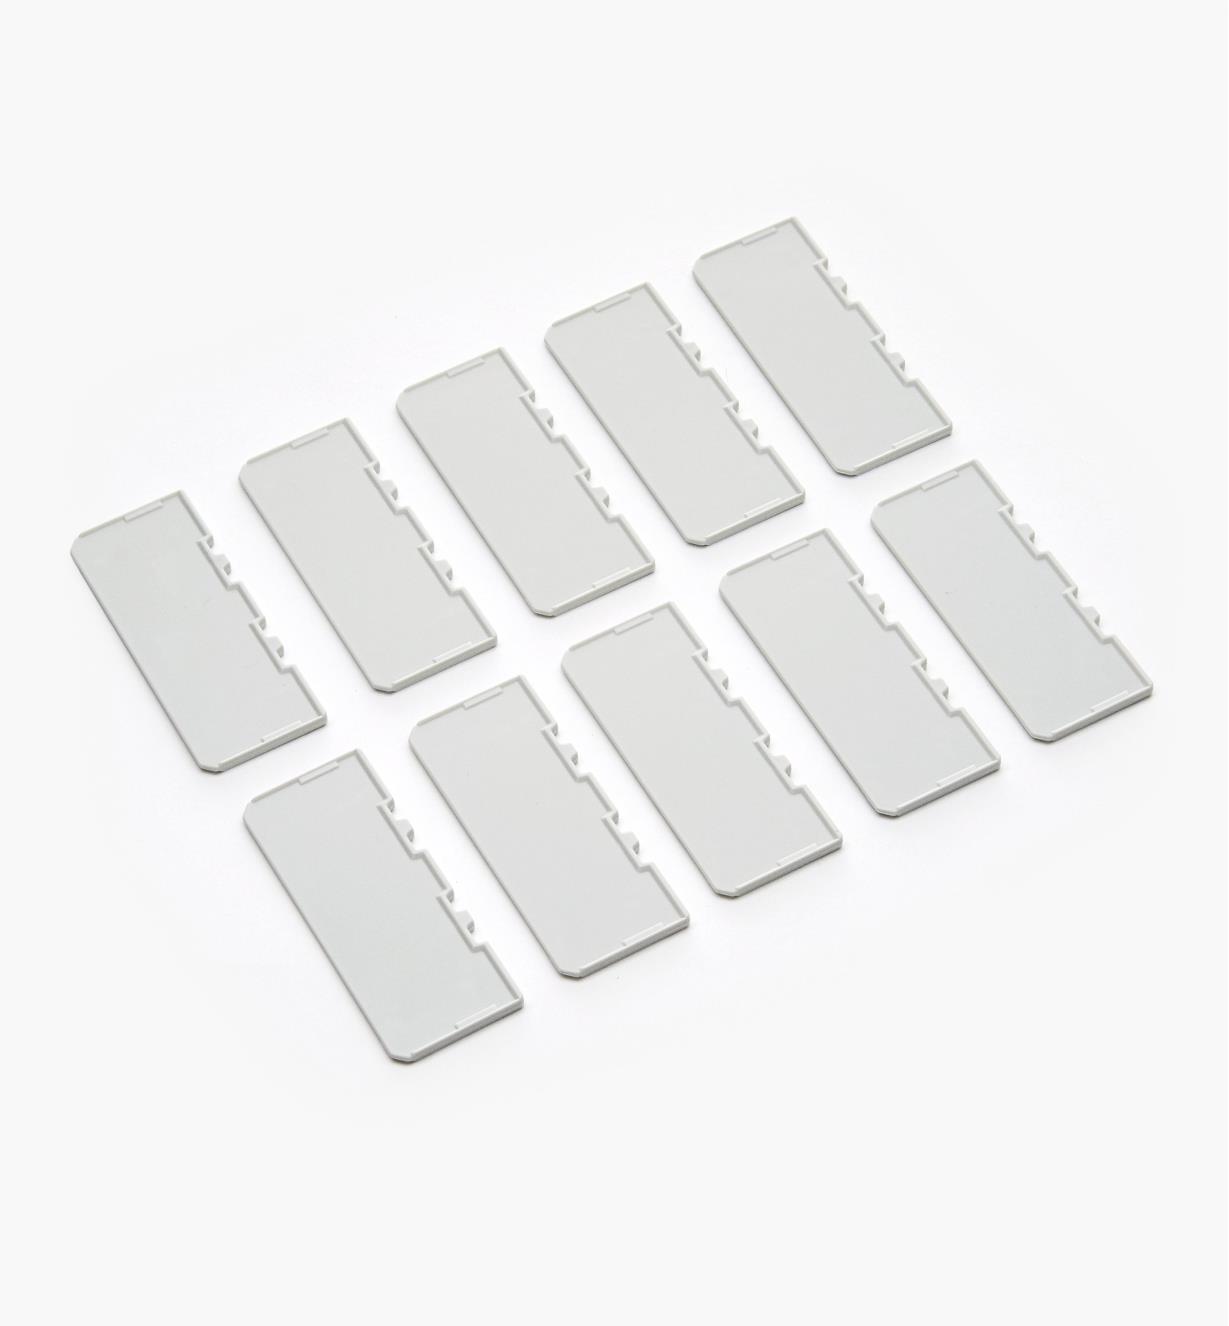 Small Sortainer Drawer Dividers, pkg. of 10